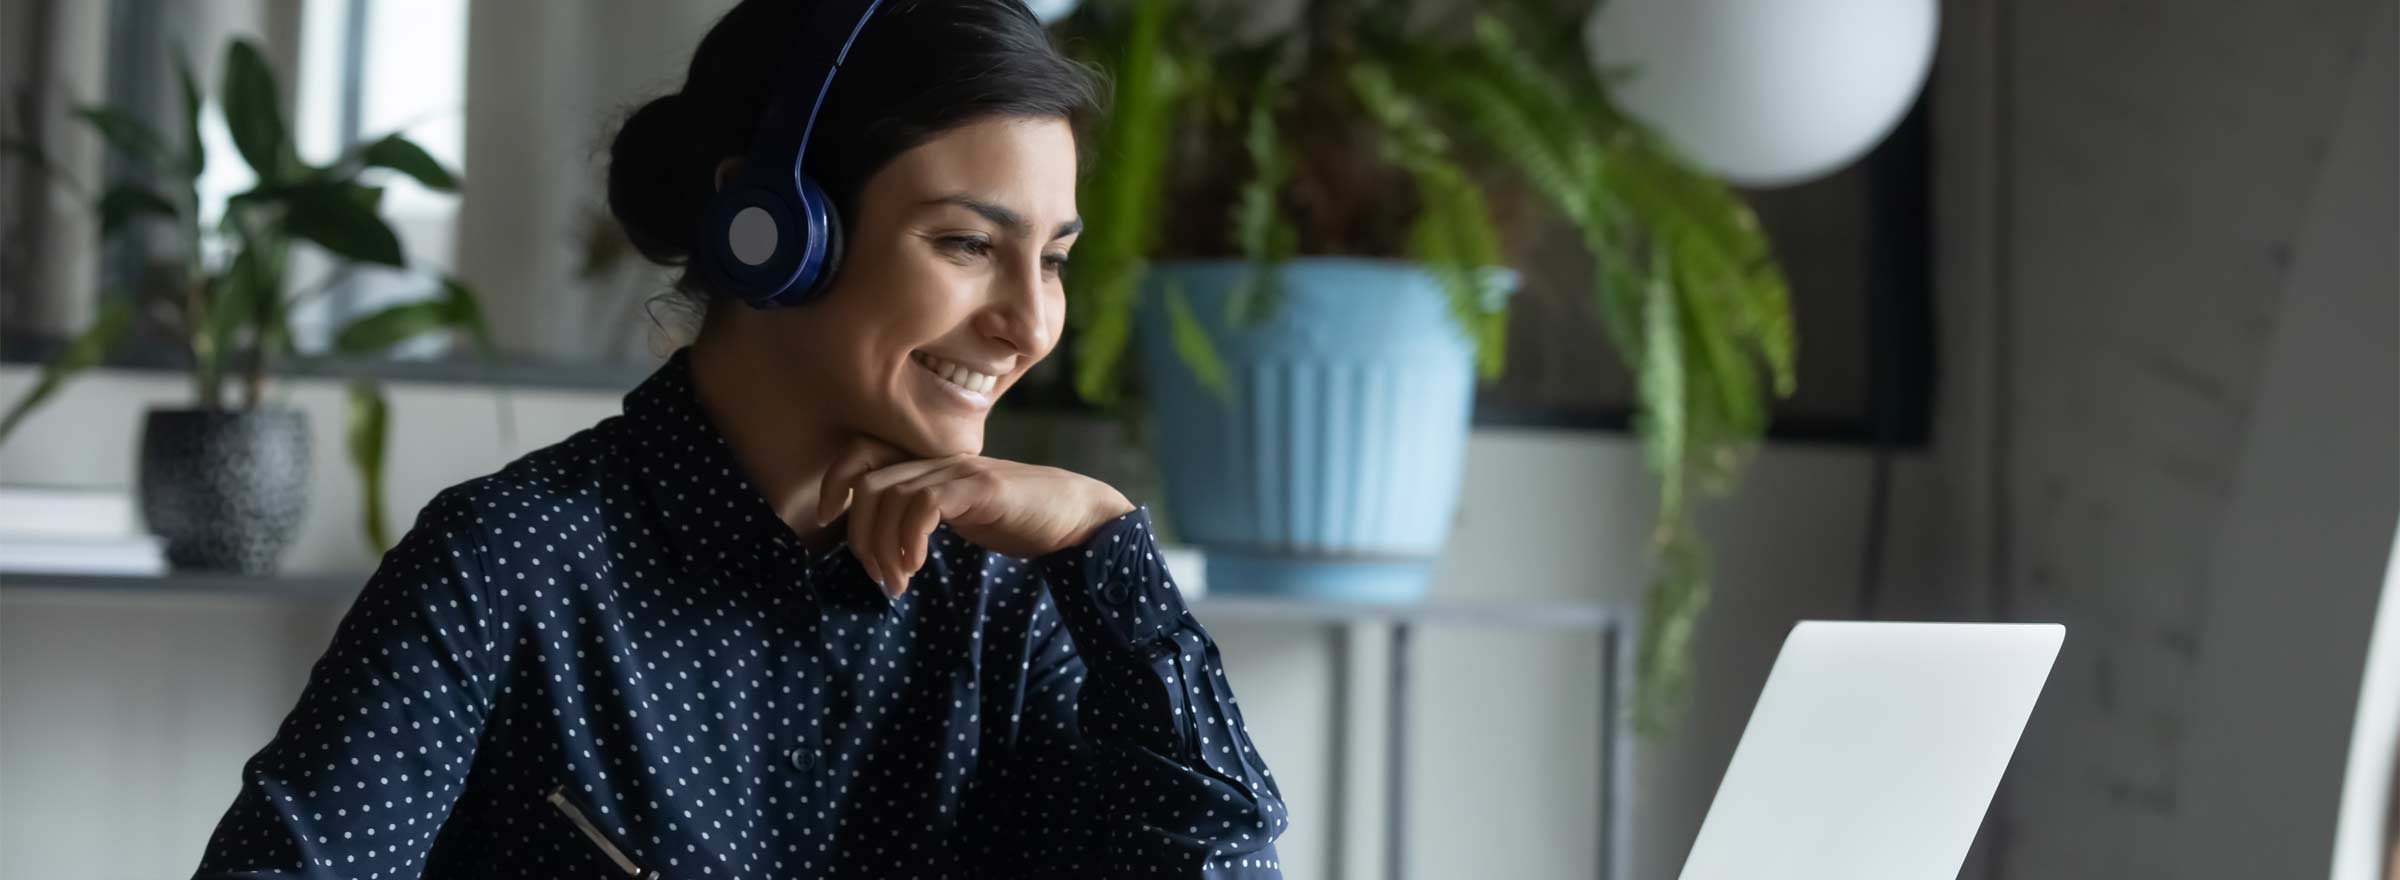 woman wearing headphones and smiling at a computer screen